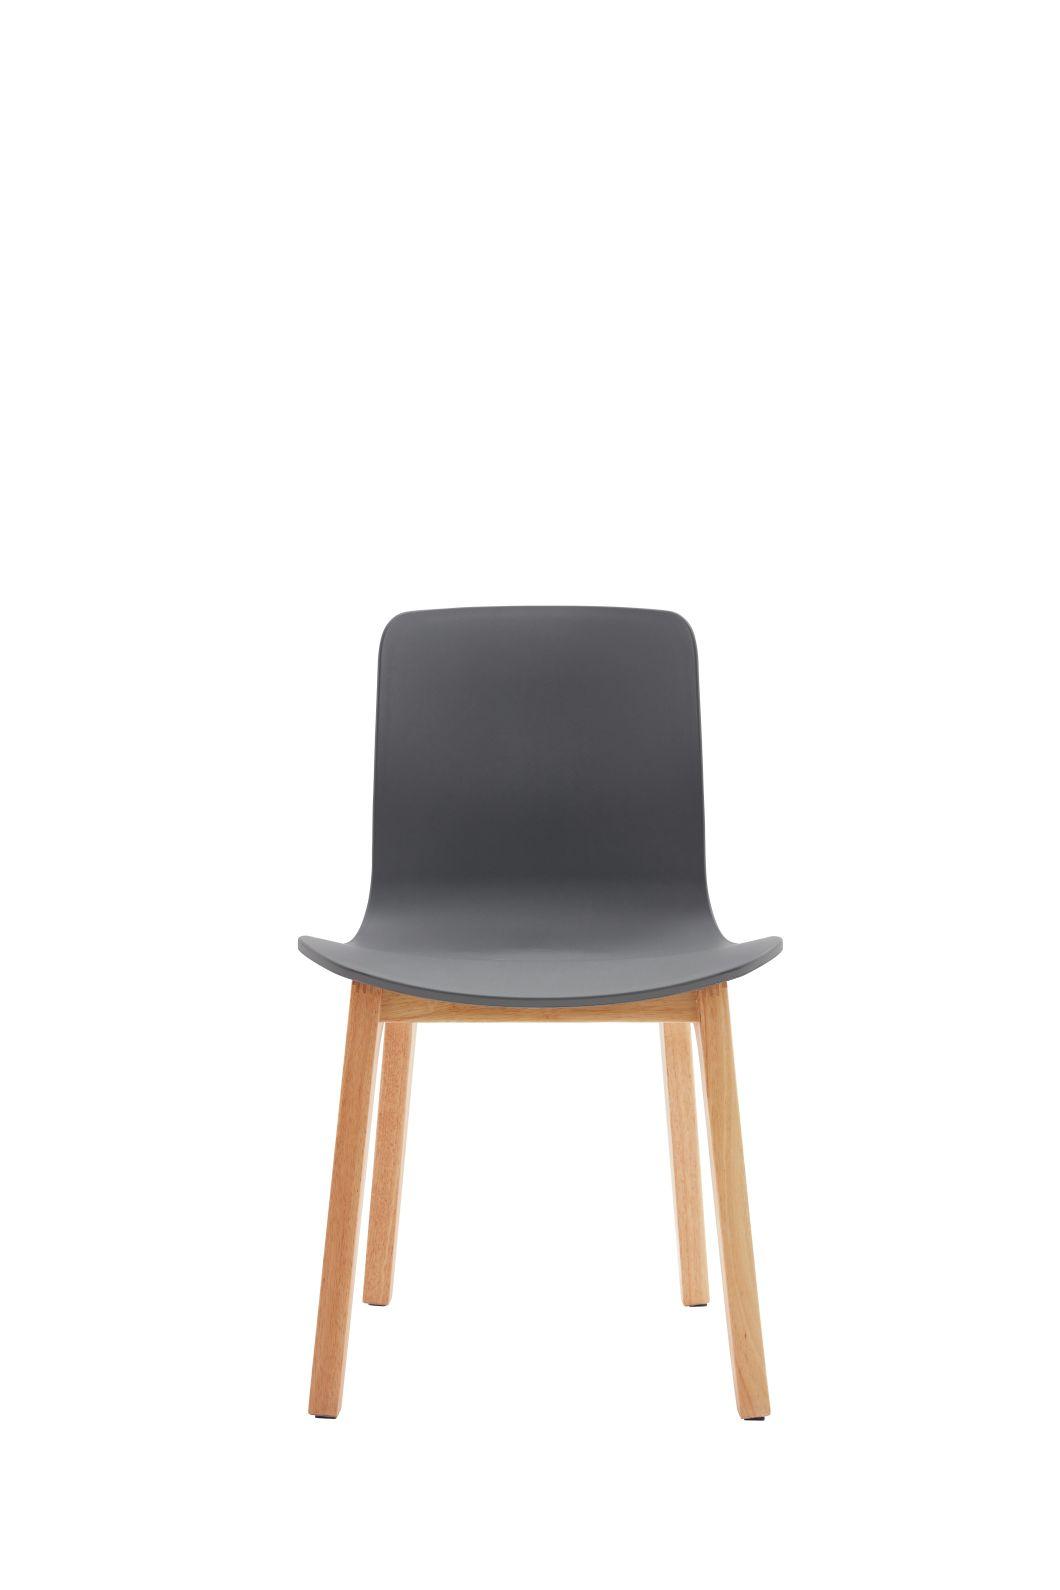 Modern Colored PP Chair Plastic Chair Beech Wood Legs Dining Chair